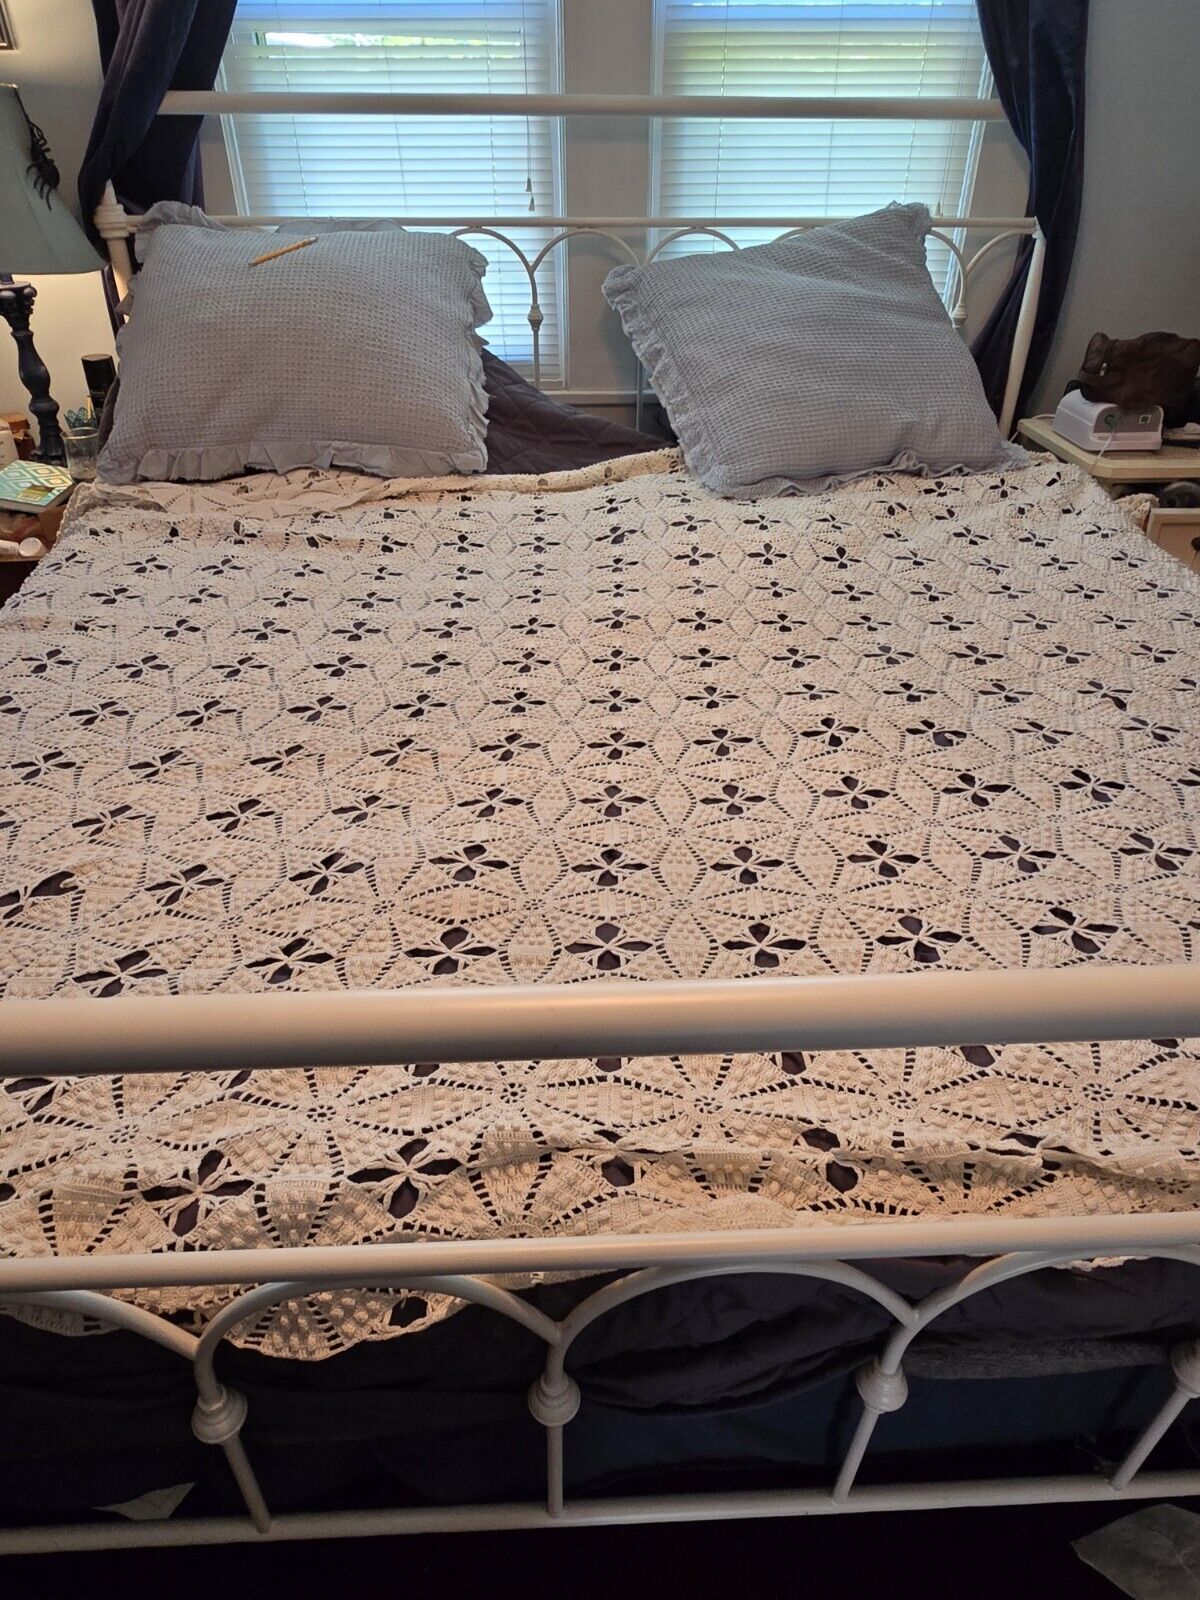 VIntage crocheted bed cover